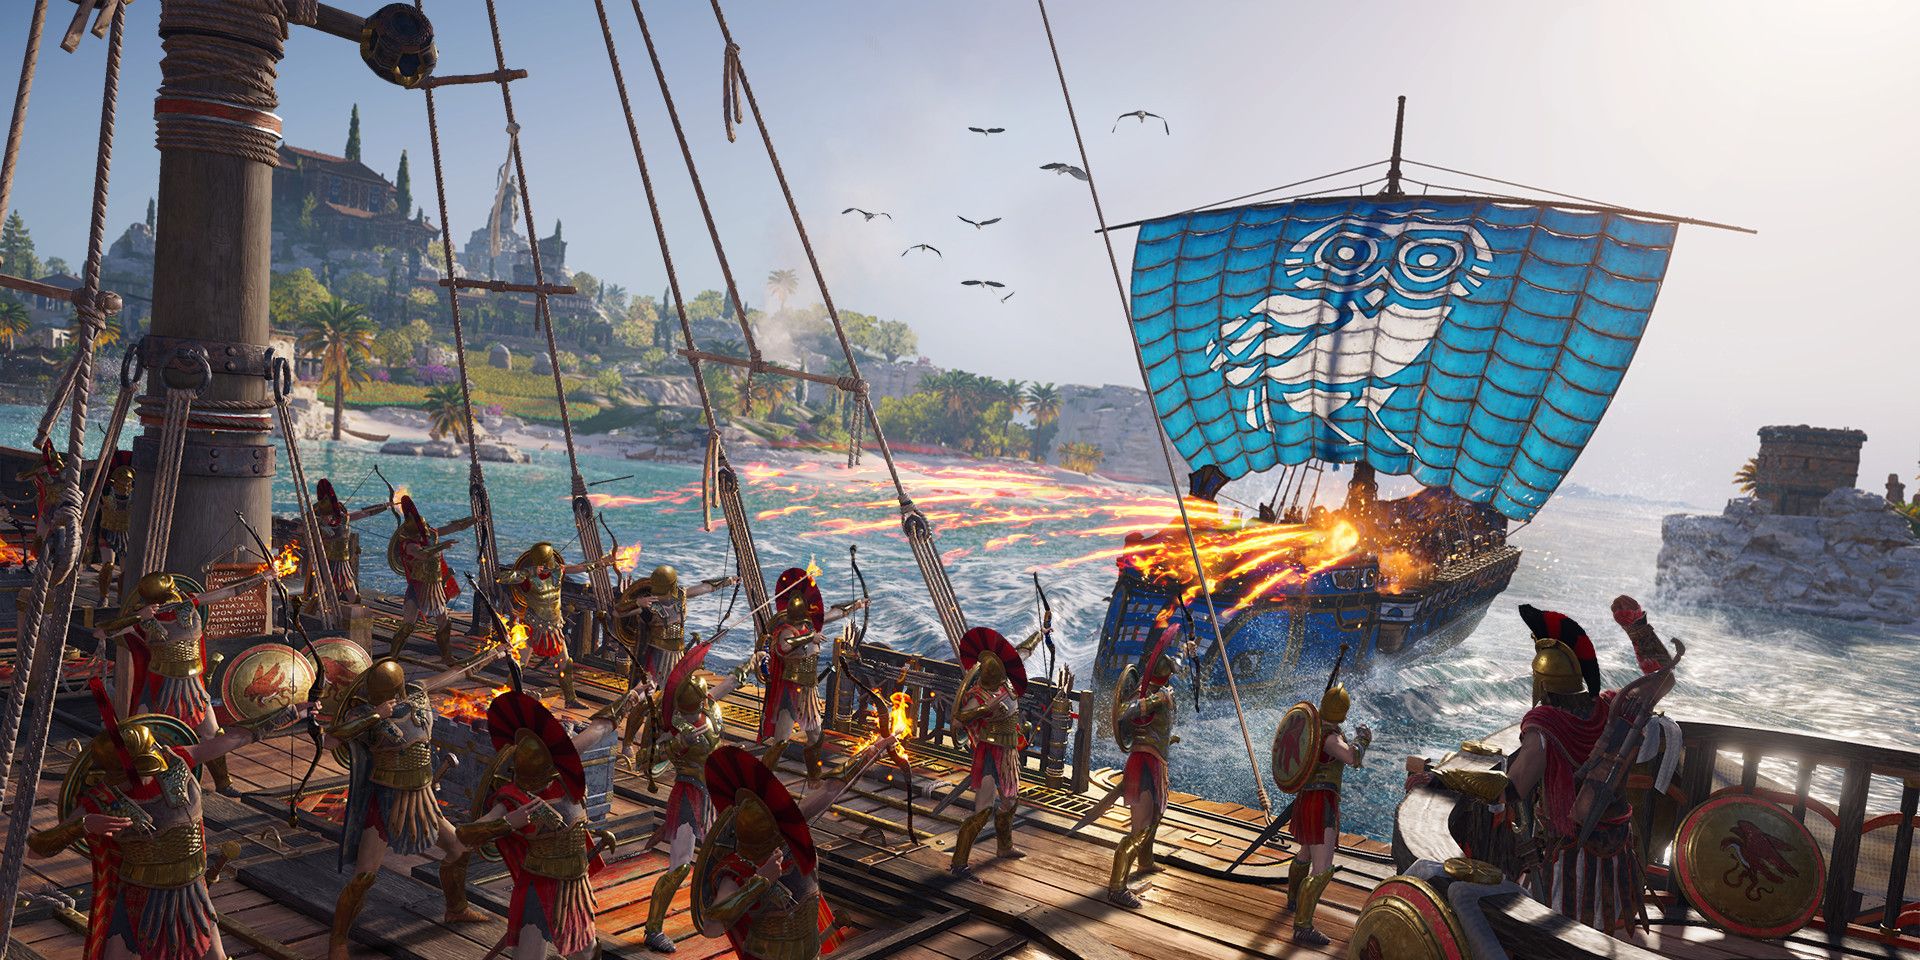 Two ships embroiled in combat in Assassin's Creed Odyssey 